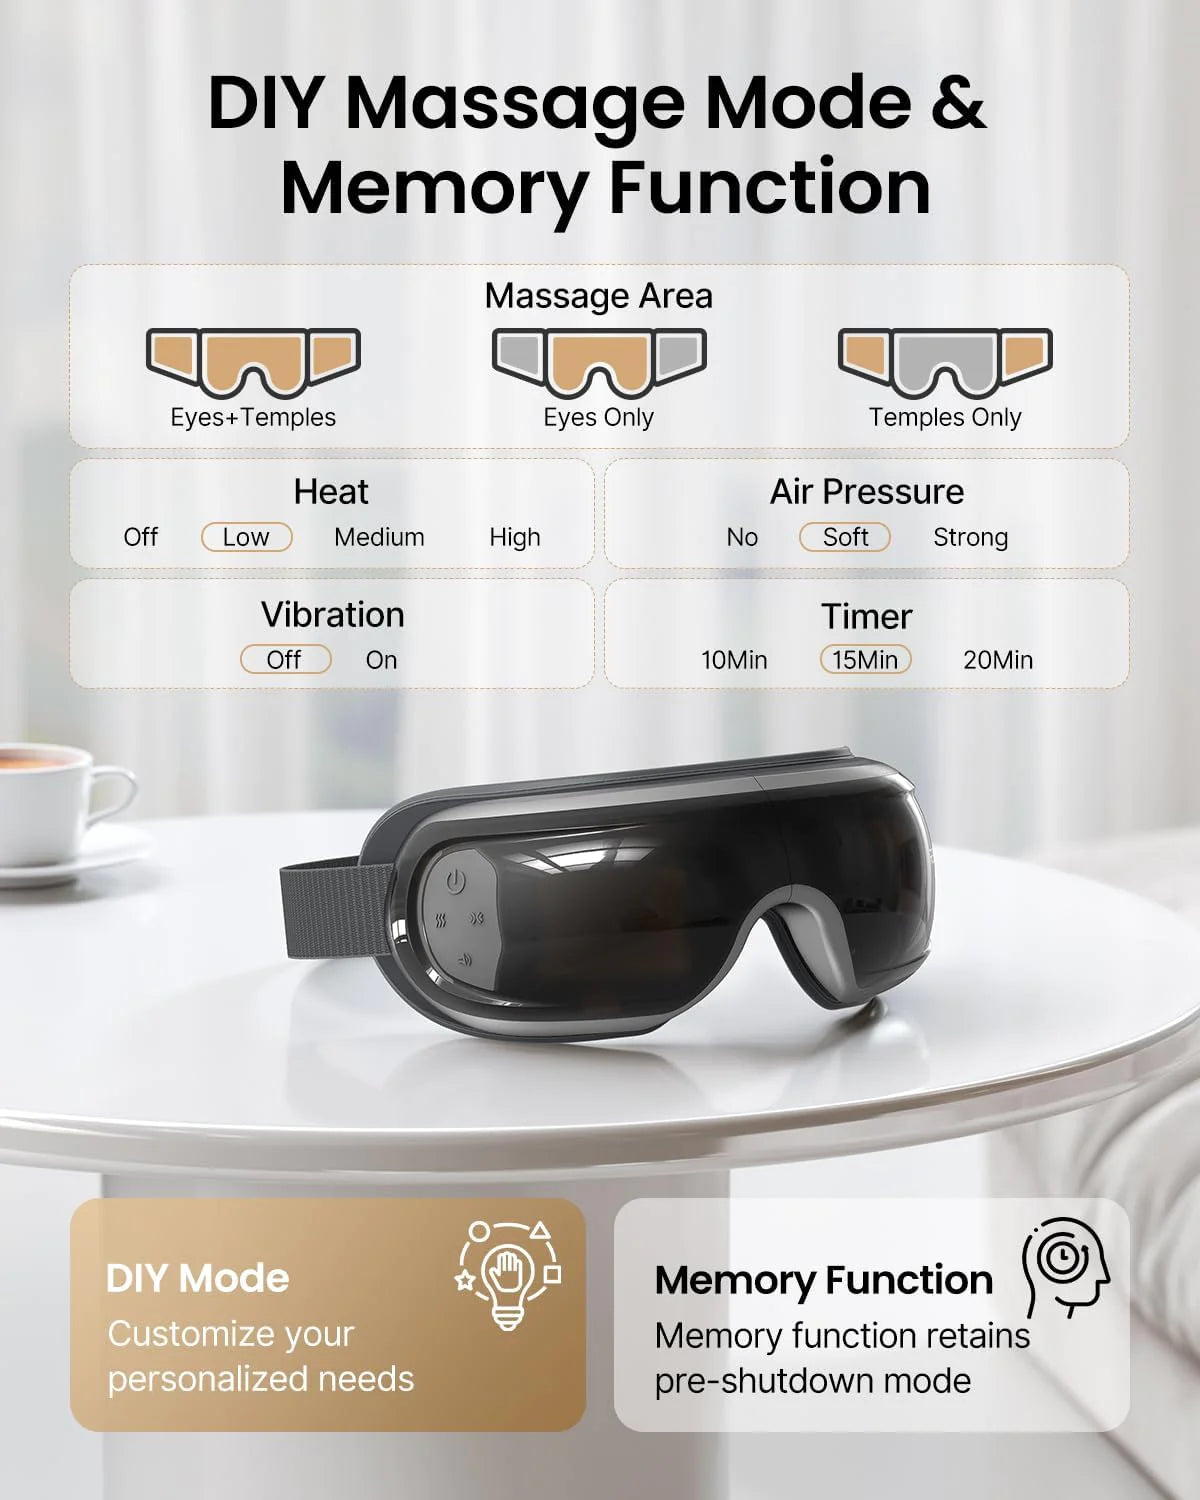 An advertisement for a Renpho EU Eyeris 3 Eye Massager with adjustable settings displayed on a digital interface. The device, ideal for migraine relief, is set on a white table with a blurred coffee cup in the background.